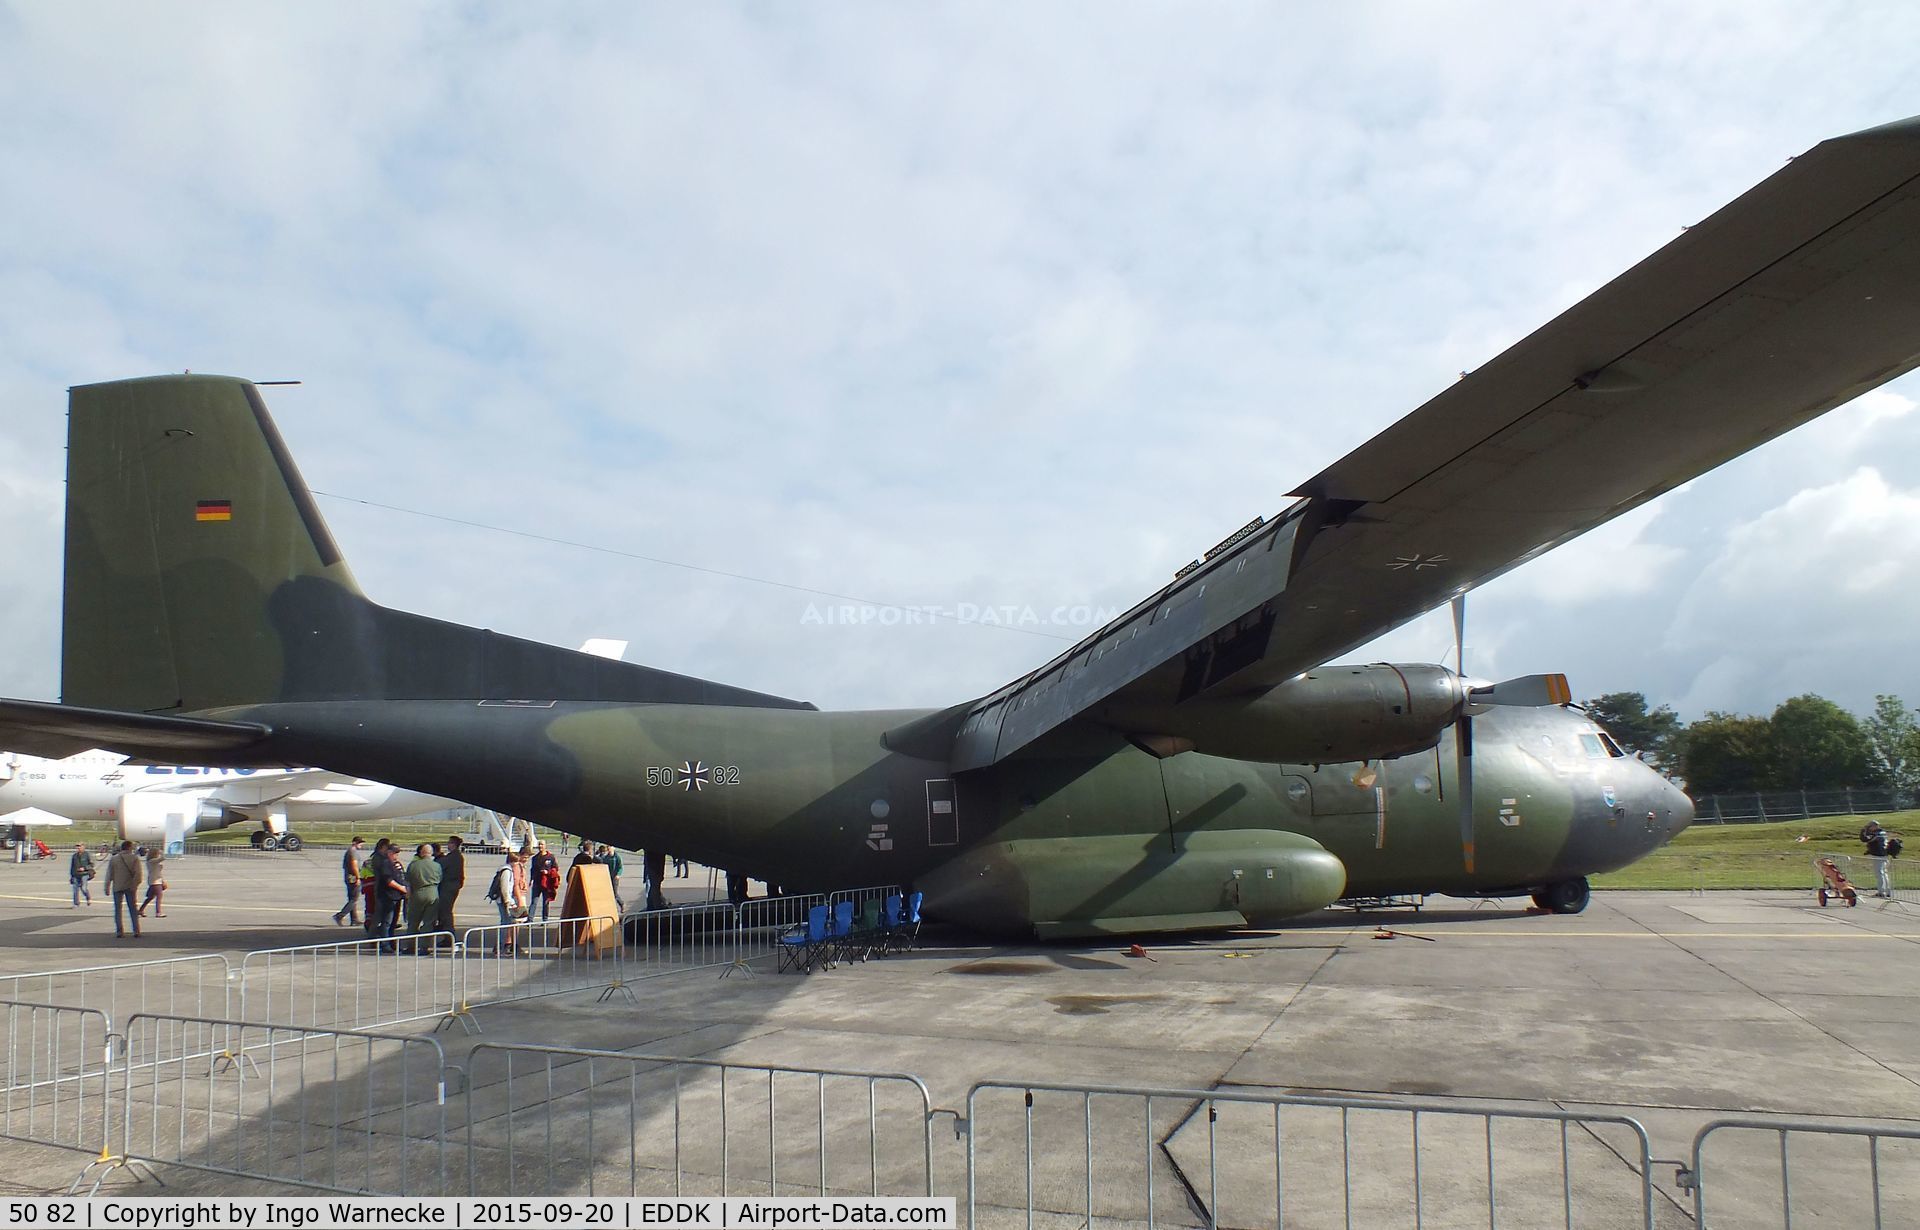 50 82, Transall C-160D C/N D119, Transall C-160D of the Luftwaffe (German Air Force) at the DLR 2015 air and space day on the side of Cologne airport